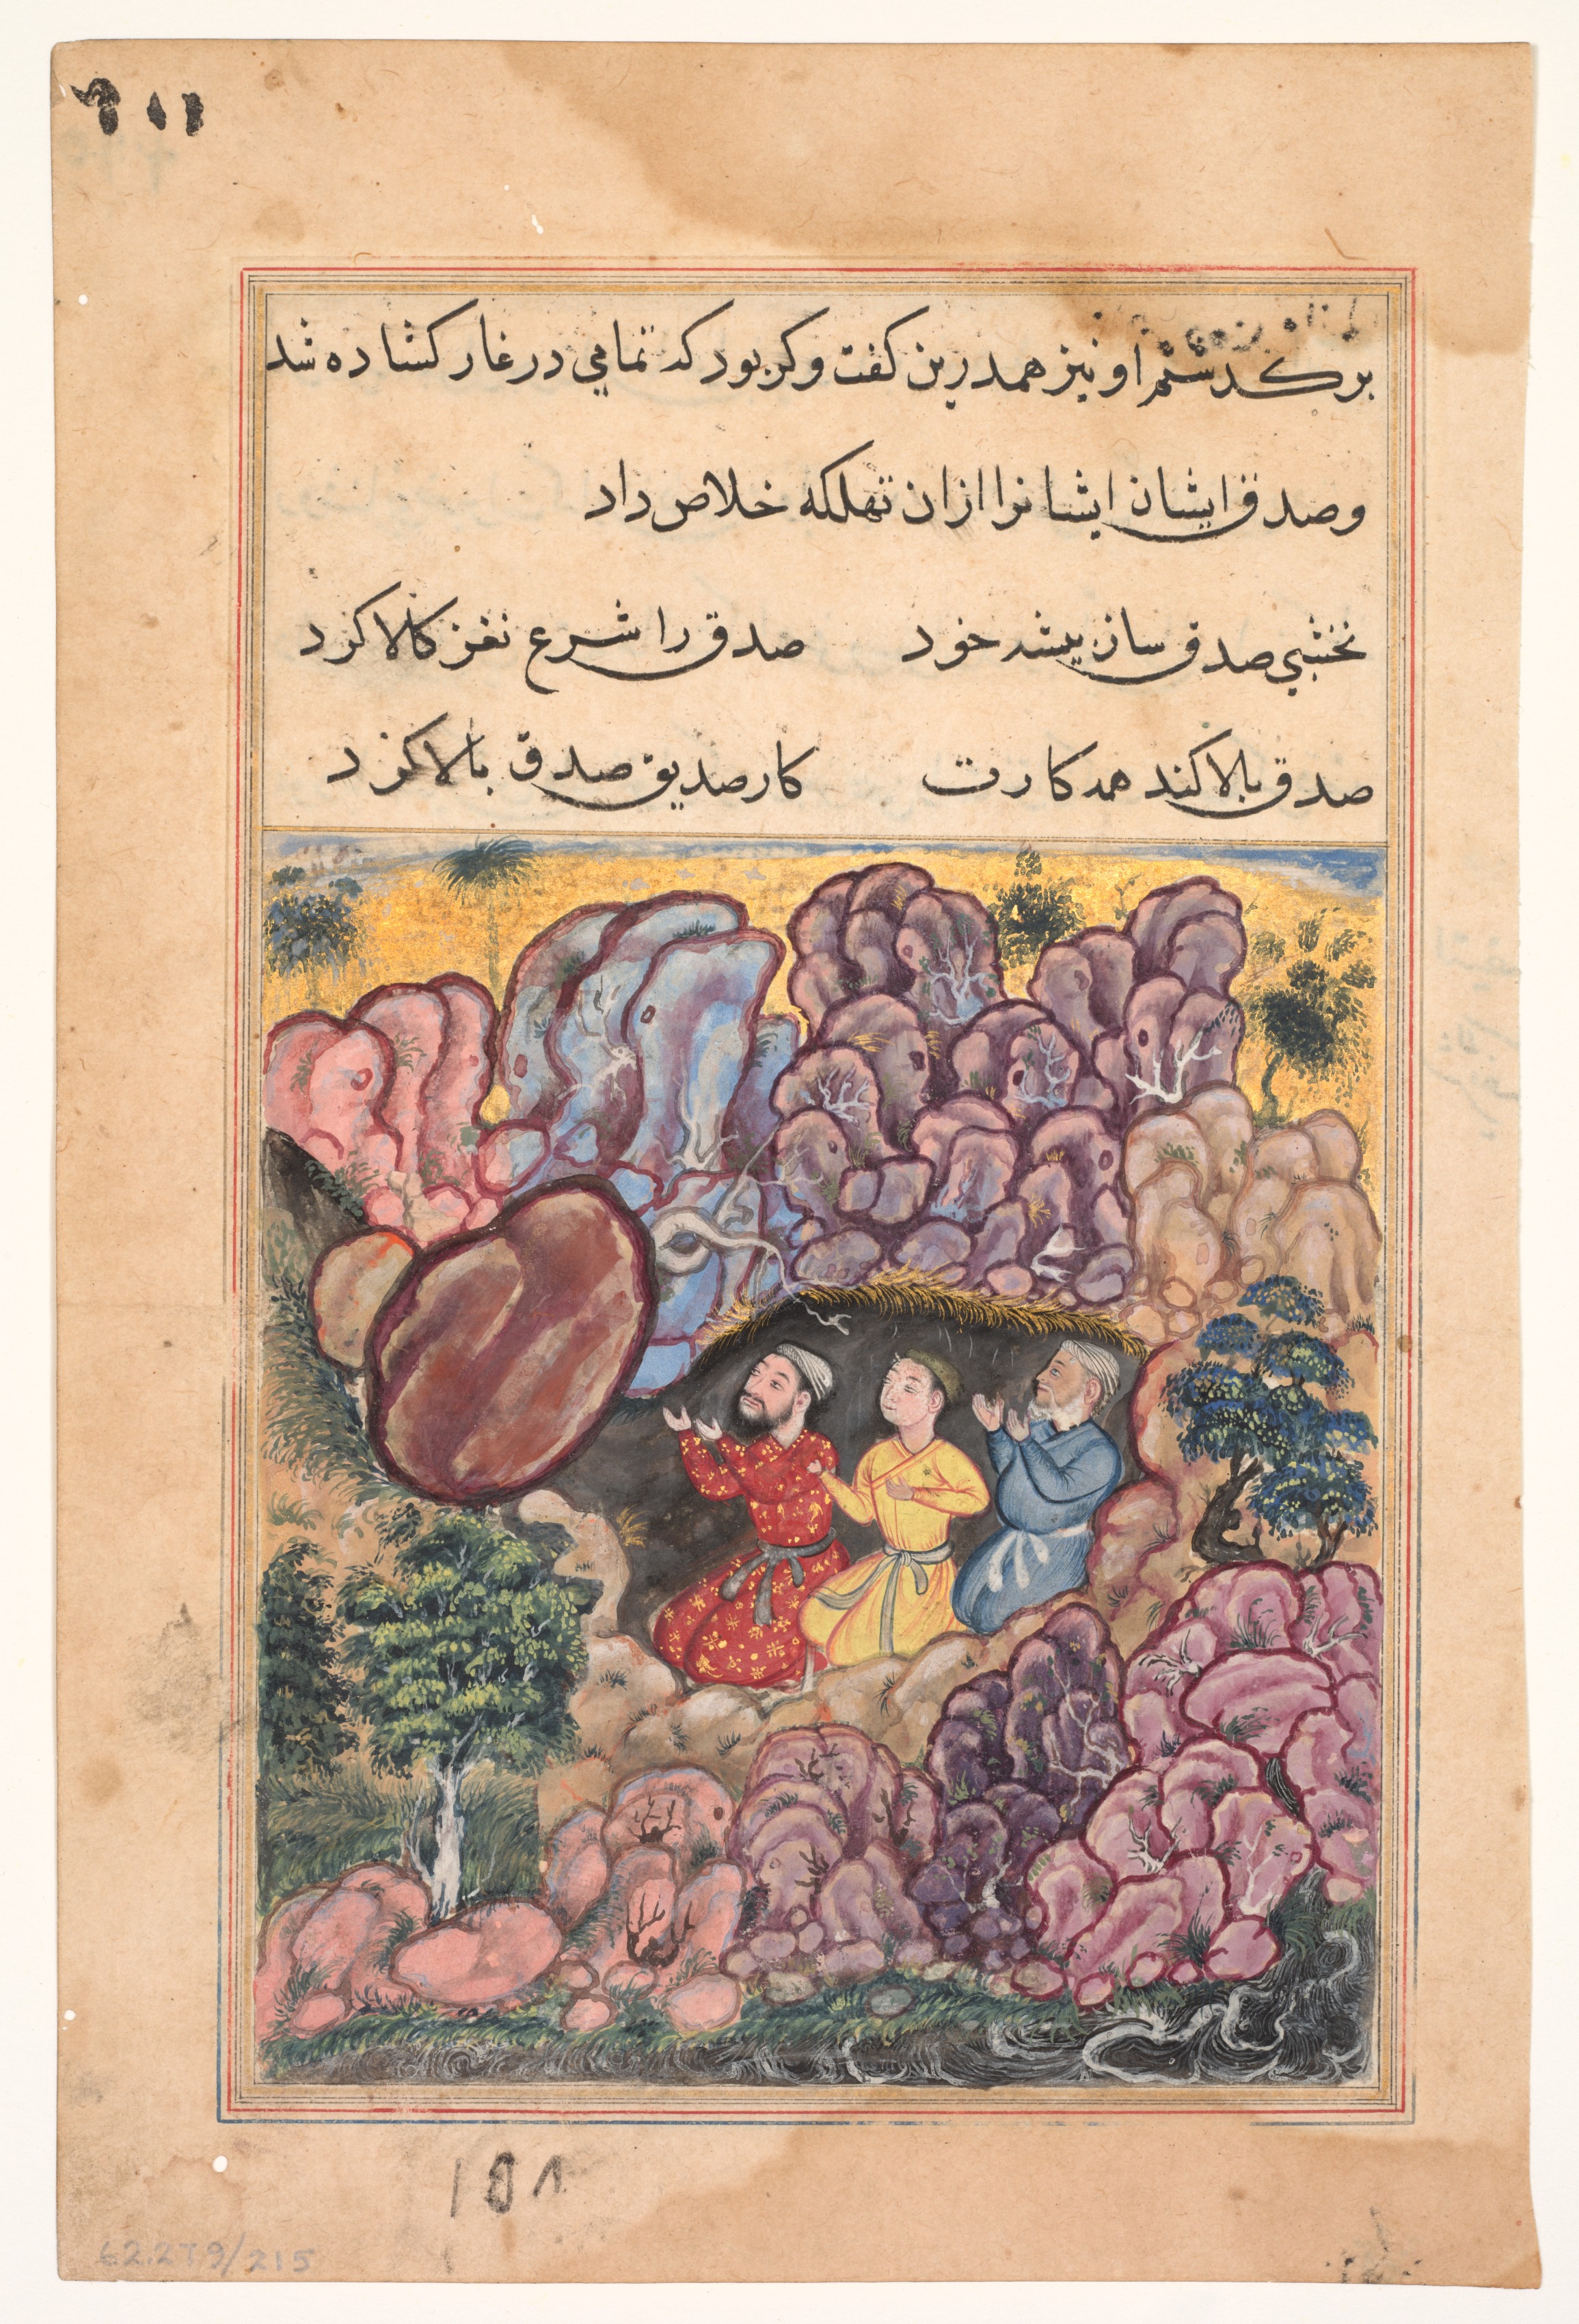 The tale of the three men trapped in a cave by a rolling boulder, from a Tuti-nama (Tales of a Parrot): Thirty-second Night